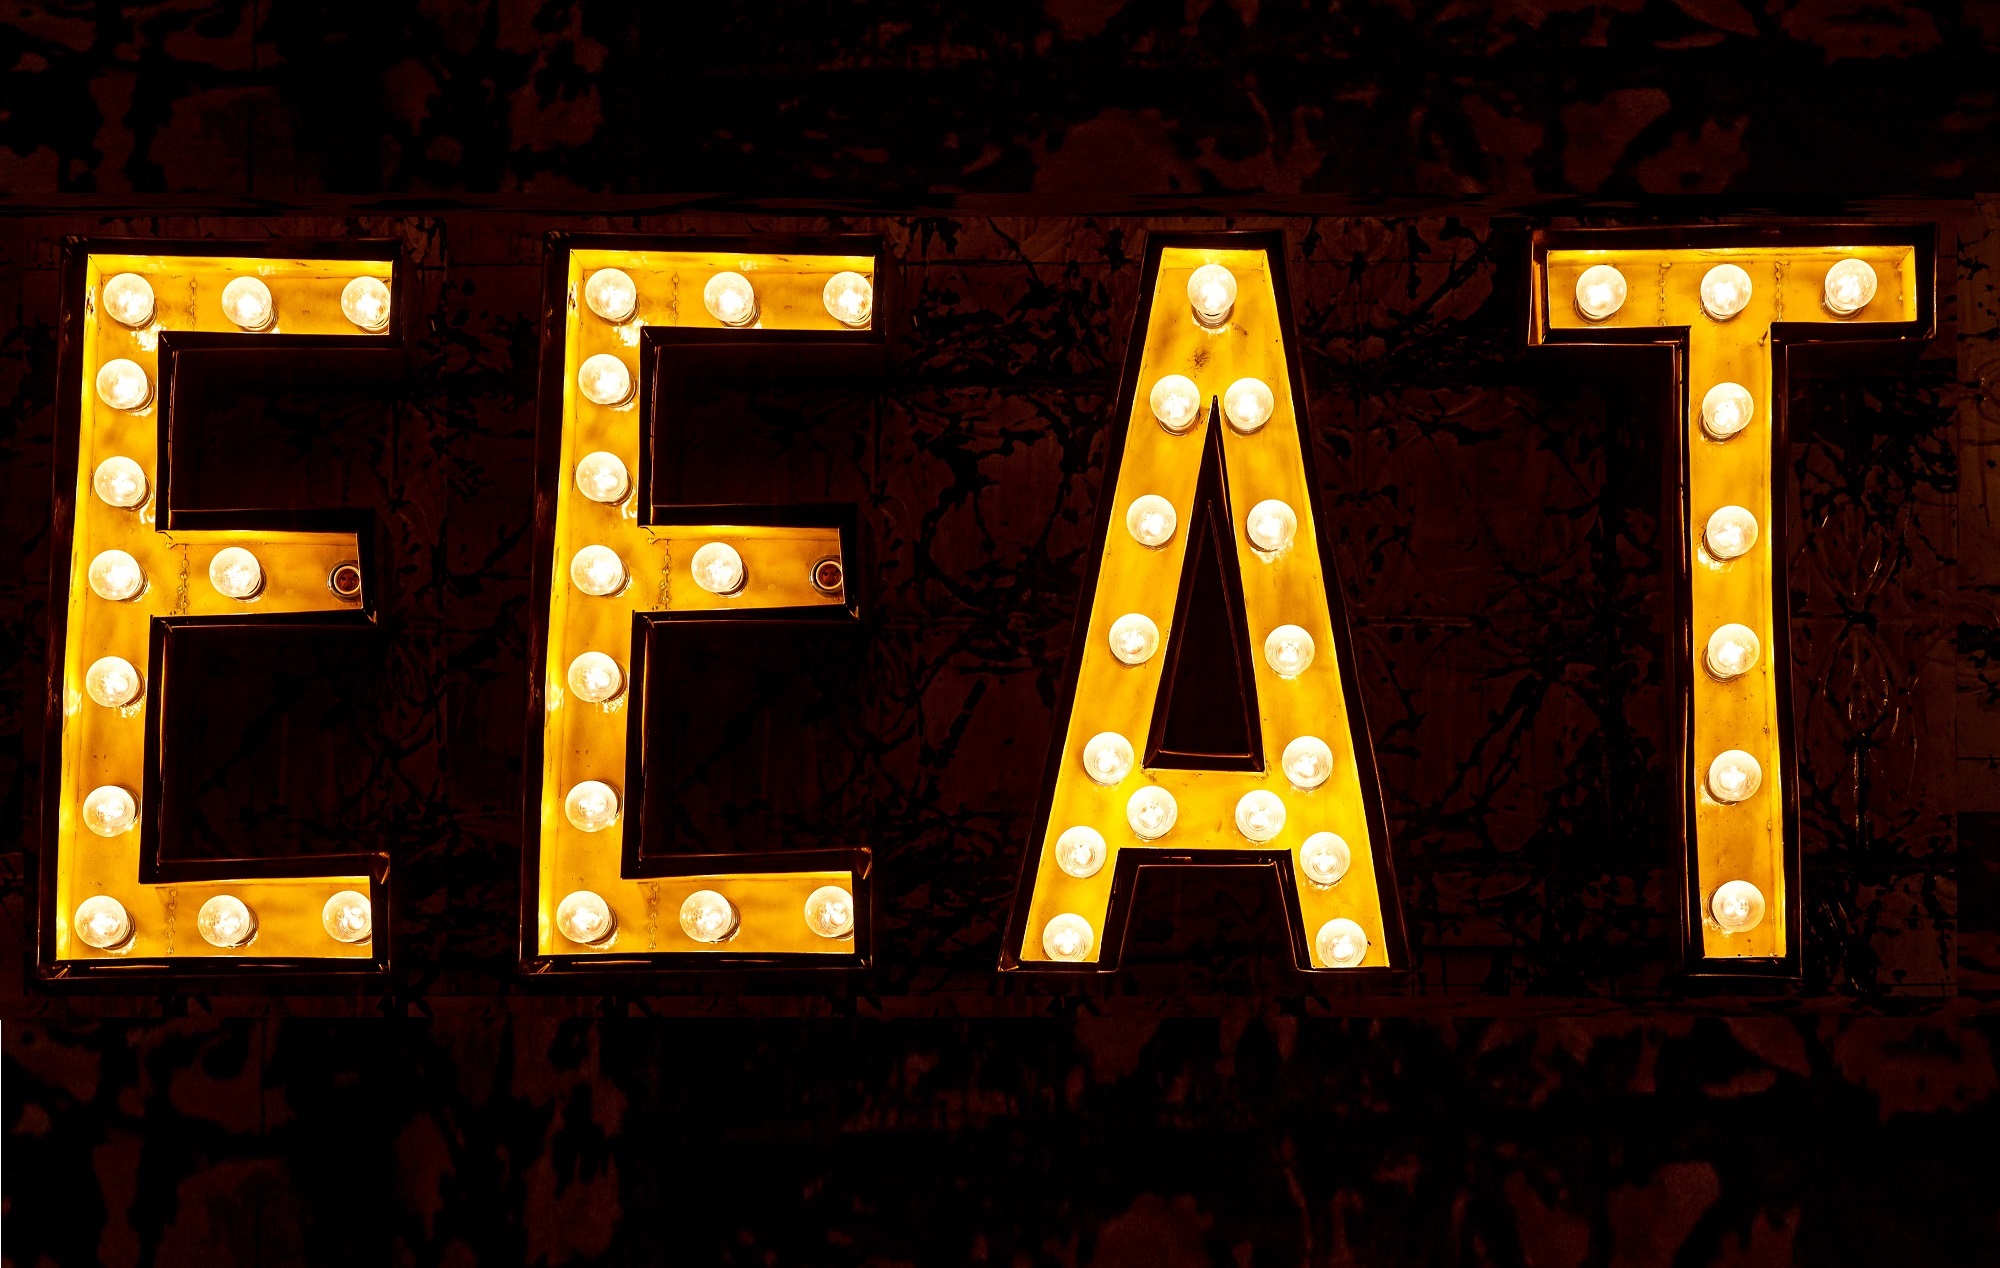 The word "eat" written by light bulbs, like a street sign, however it's spelled with two e's (E-E-A-T), which is an acronym for Experience, Expertise, Authority, and Trust.